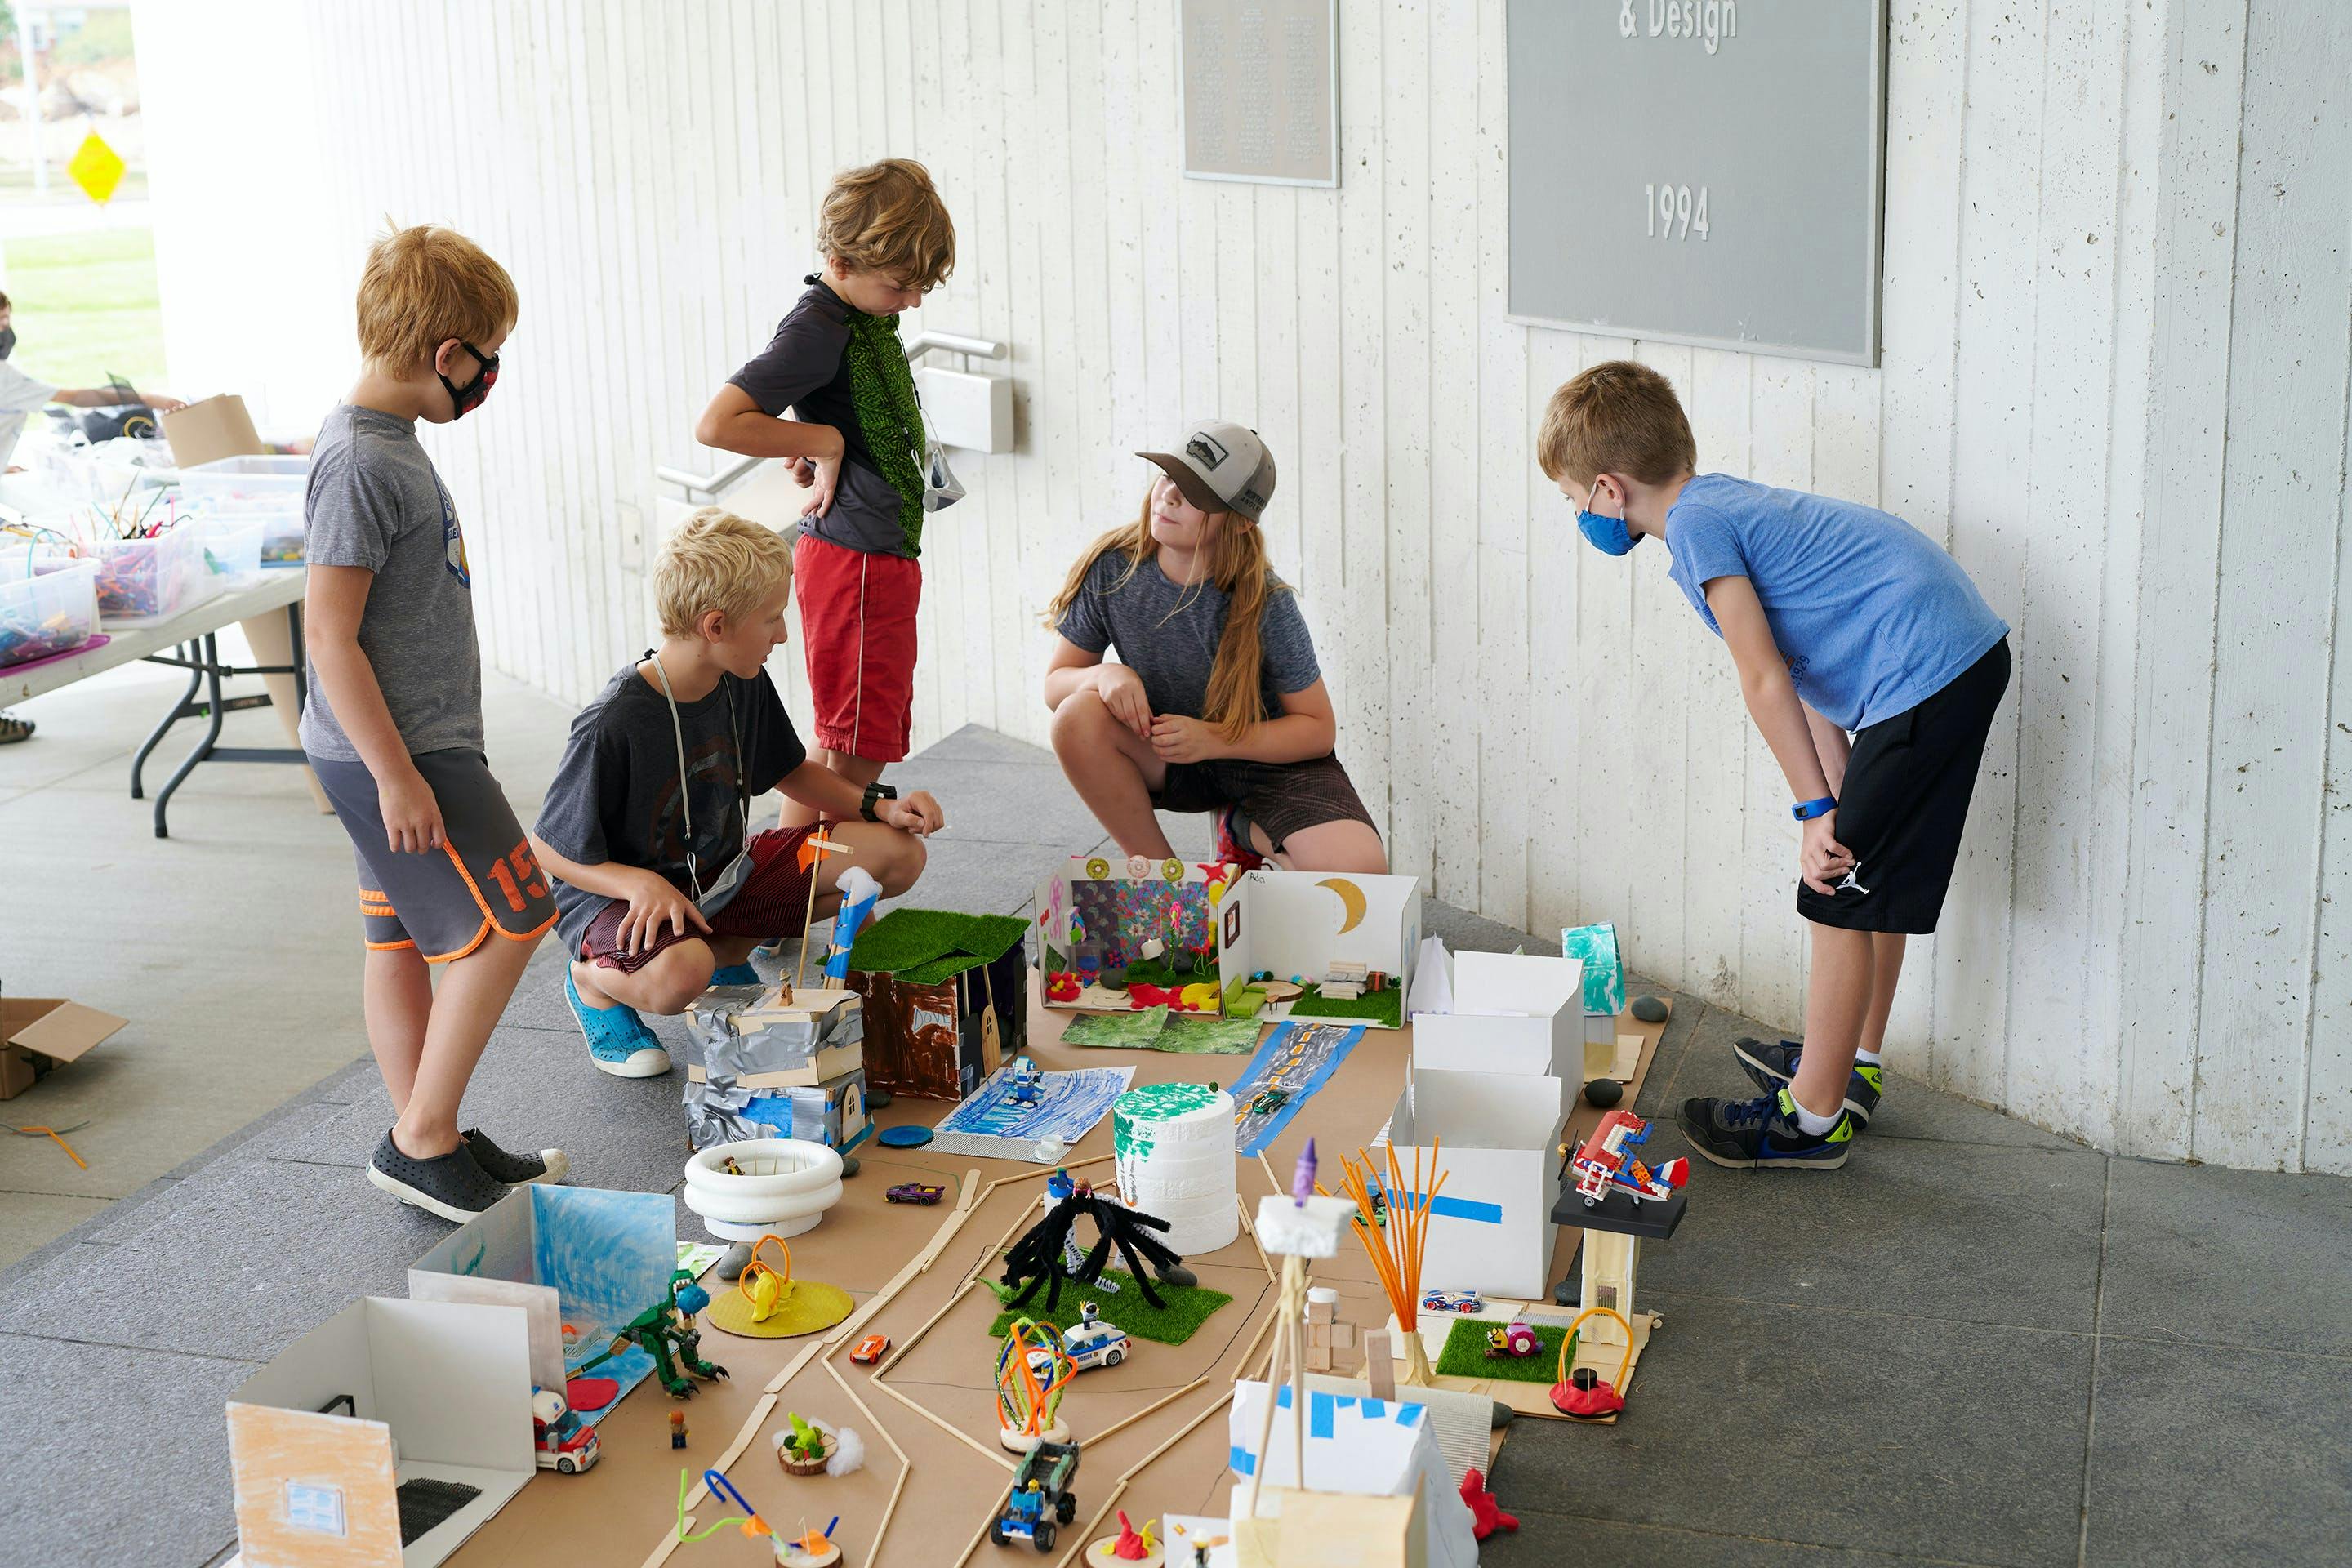 Children working together on an art activity at Kemper Museum